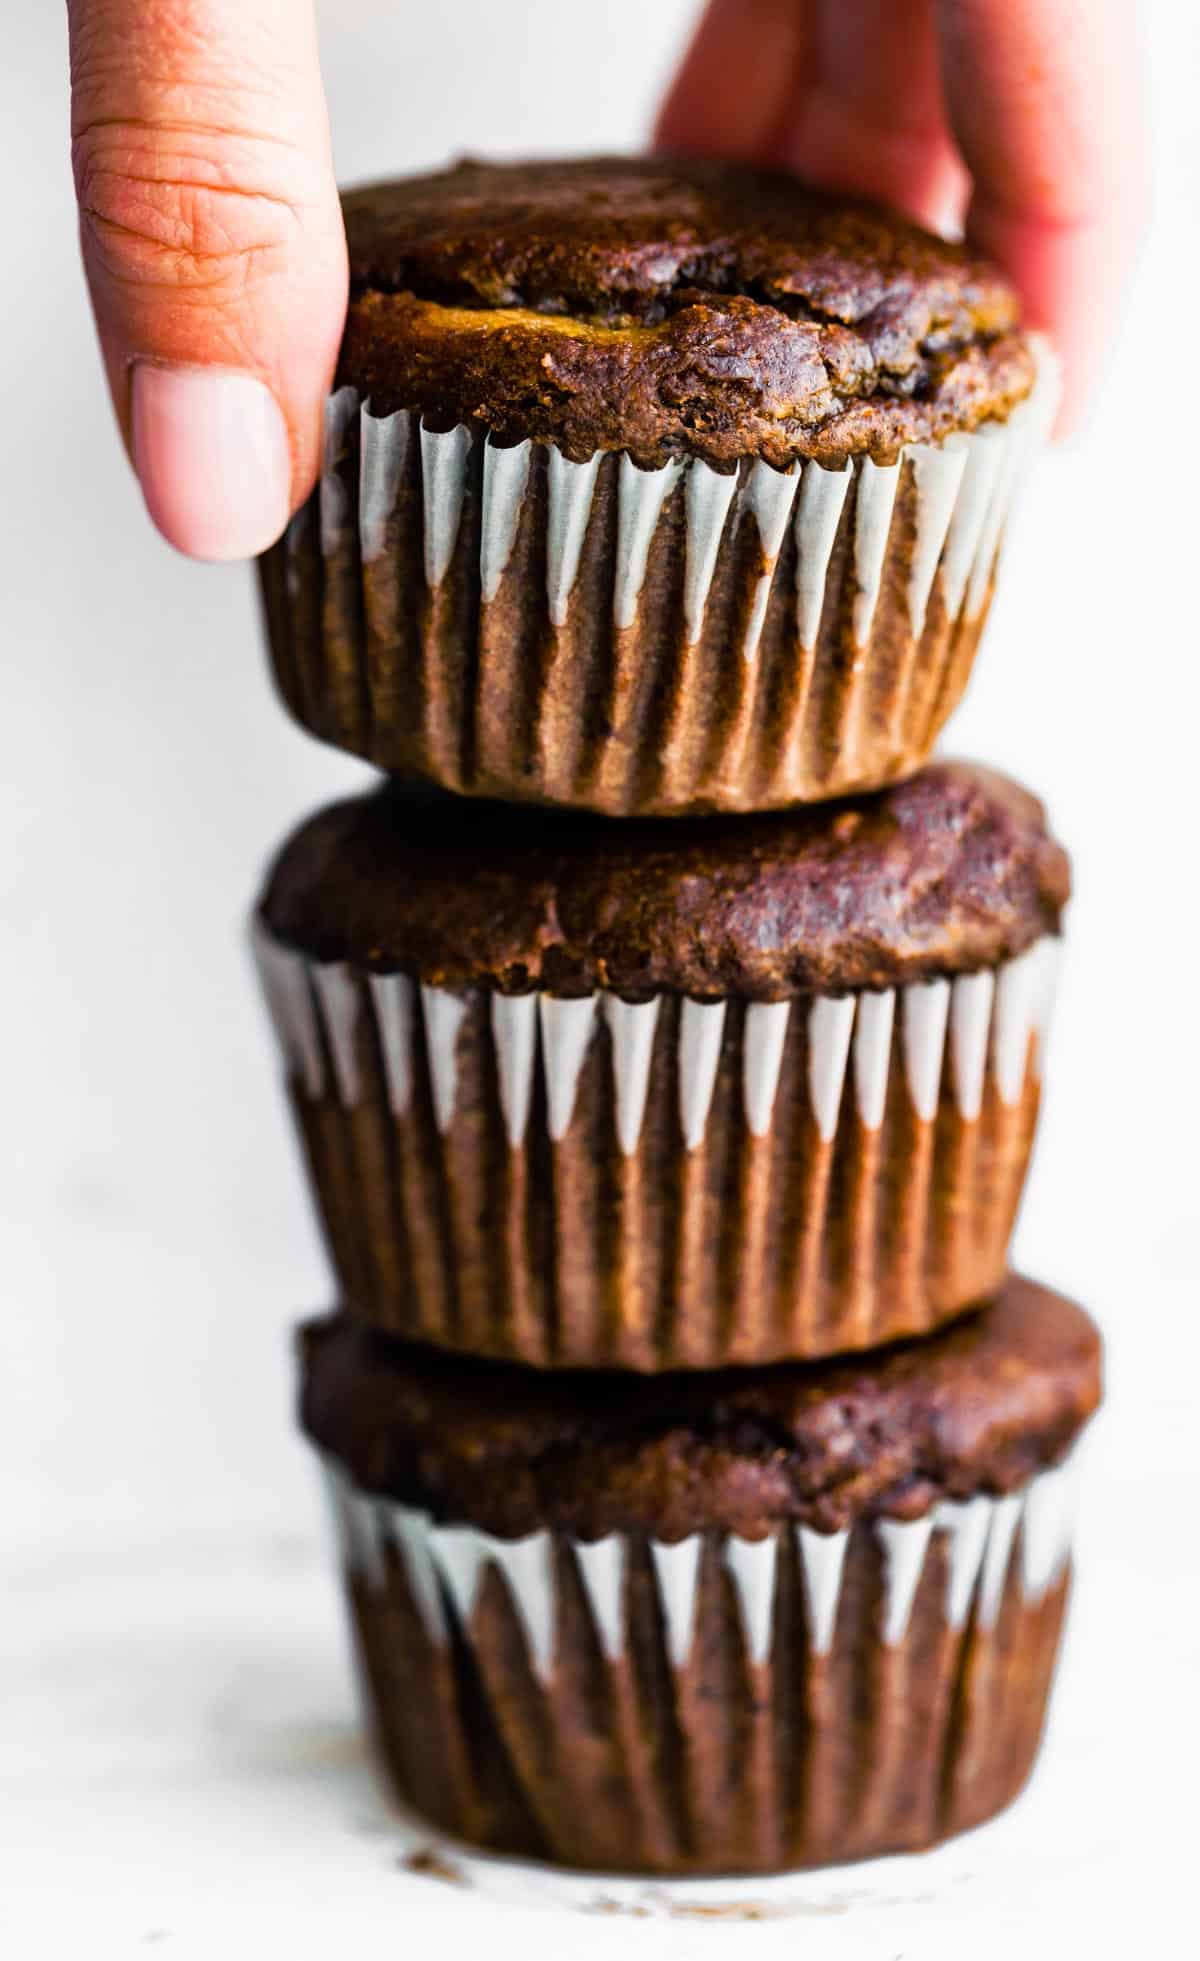 A woman's hand reaching for the top muffin stacked on two other healthy banana muffins.